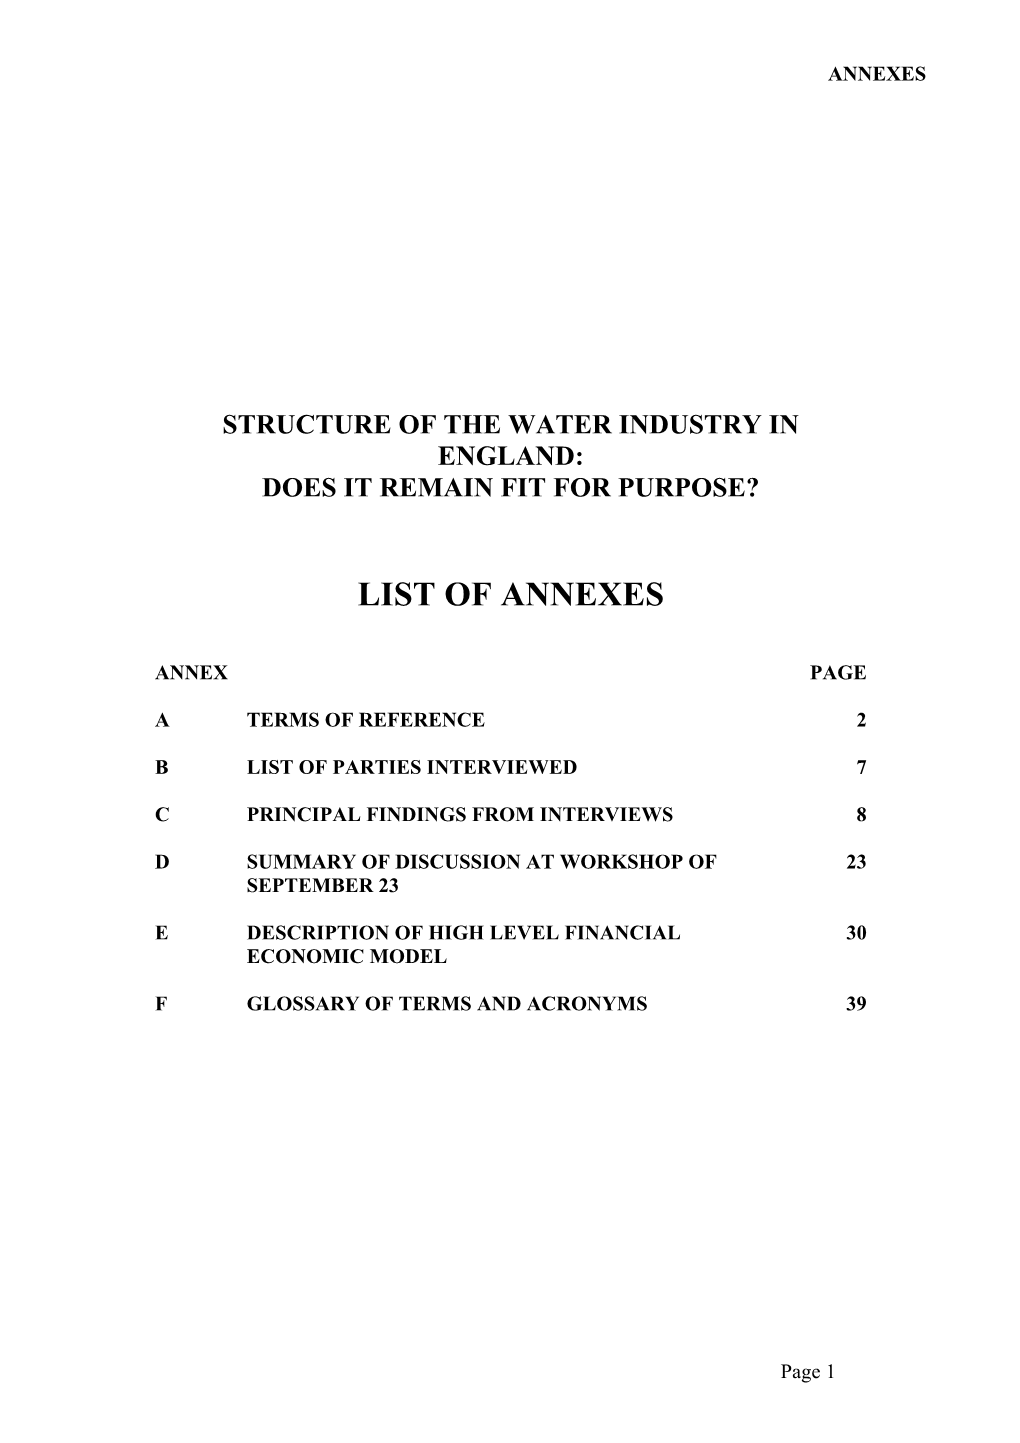 Report: Structure of the Water Industry in England: Does It Remain Fit